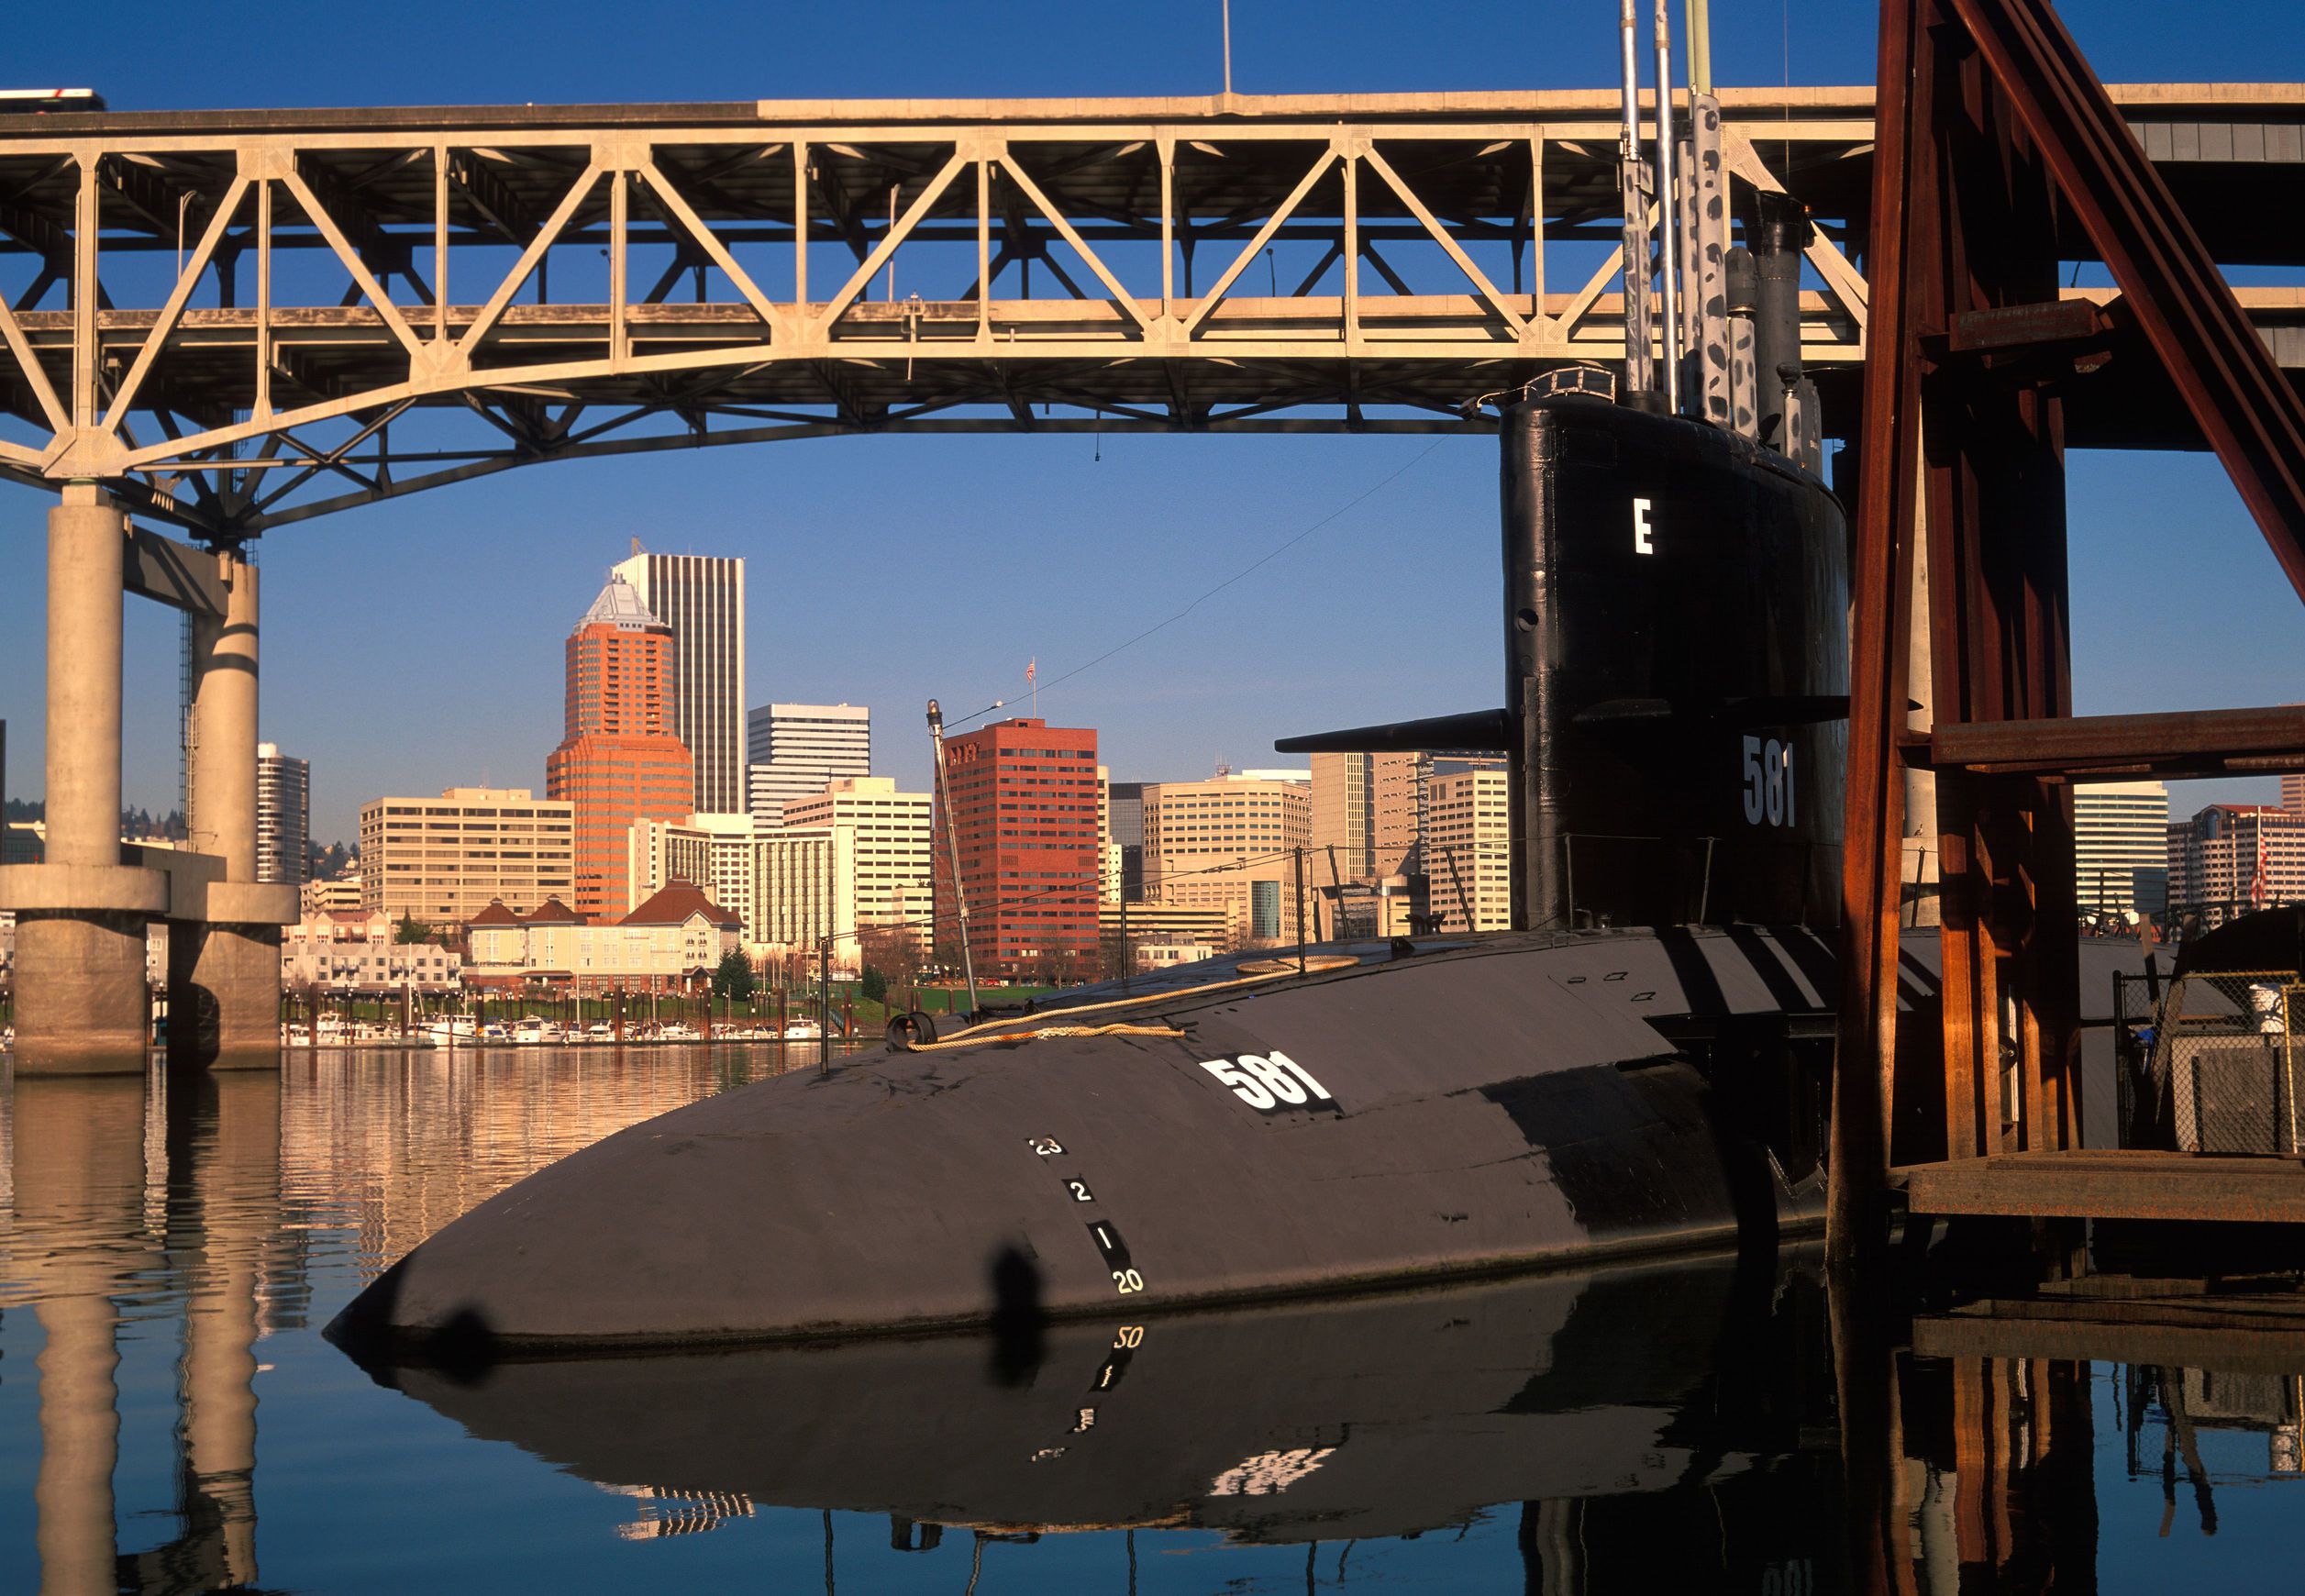 A submarine outside OMSI to illustrate 4 Fun Family Things To Do In Portland, Oregon